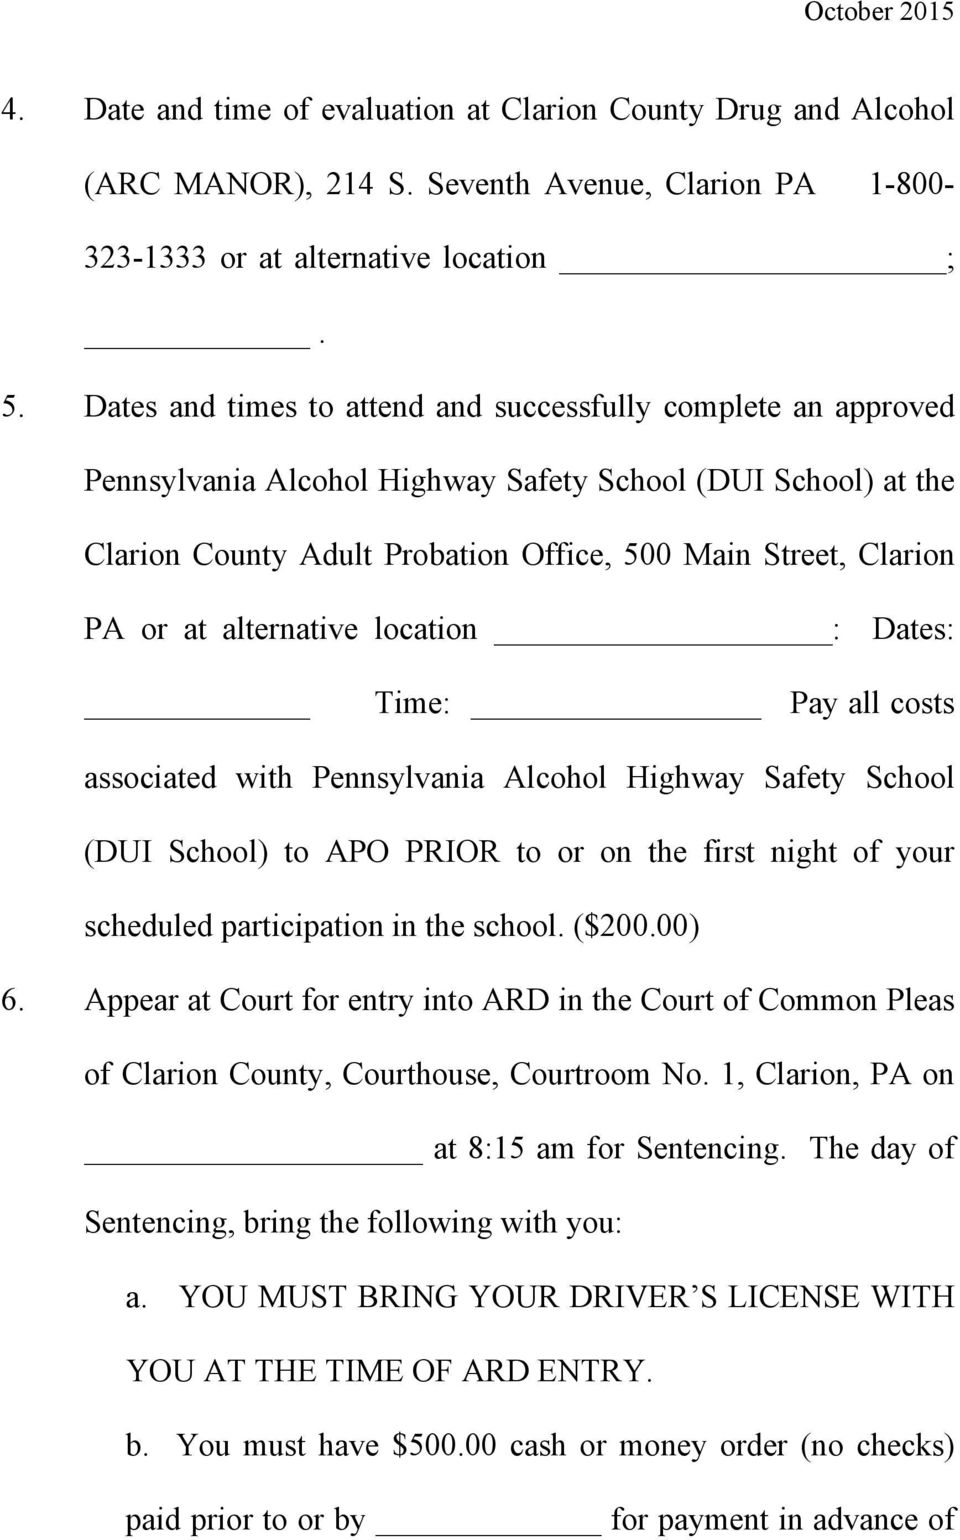 alternative location : Dates: Time: Pay all costs associated with Pennsylvania Alcohol Highway Safety School (DUI School) to APO PRIOR to or on the first night of your scheduled participation in the